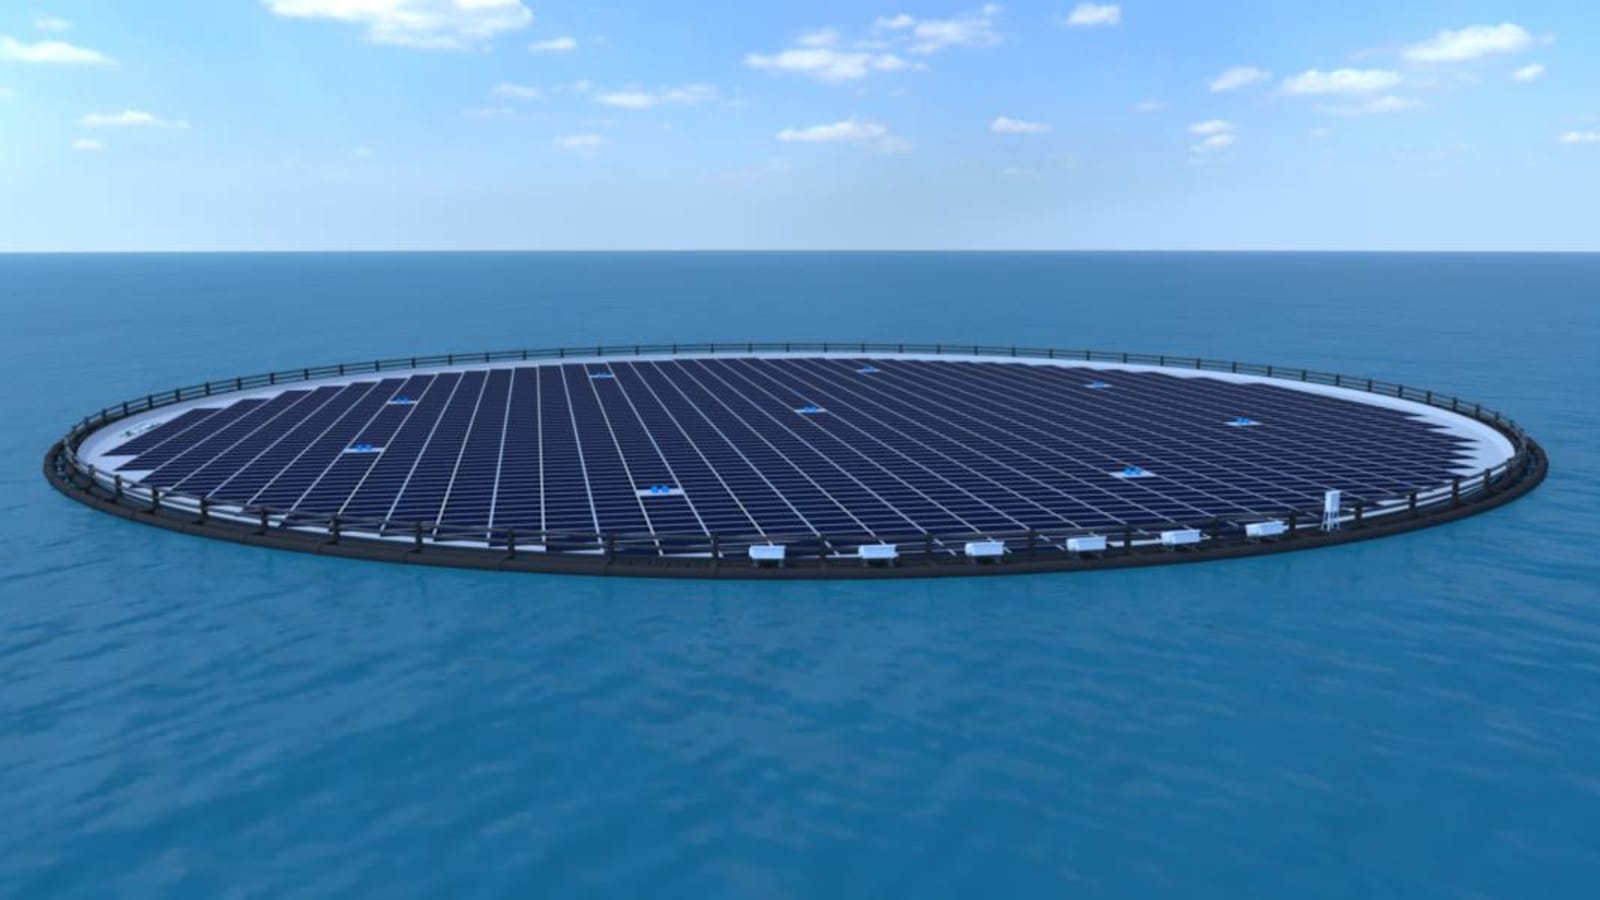 new-floating-solar-panel-system-among-3-clean-energy-projects-to-be-tested-at-jurong-island